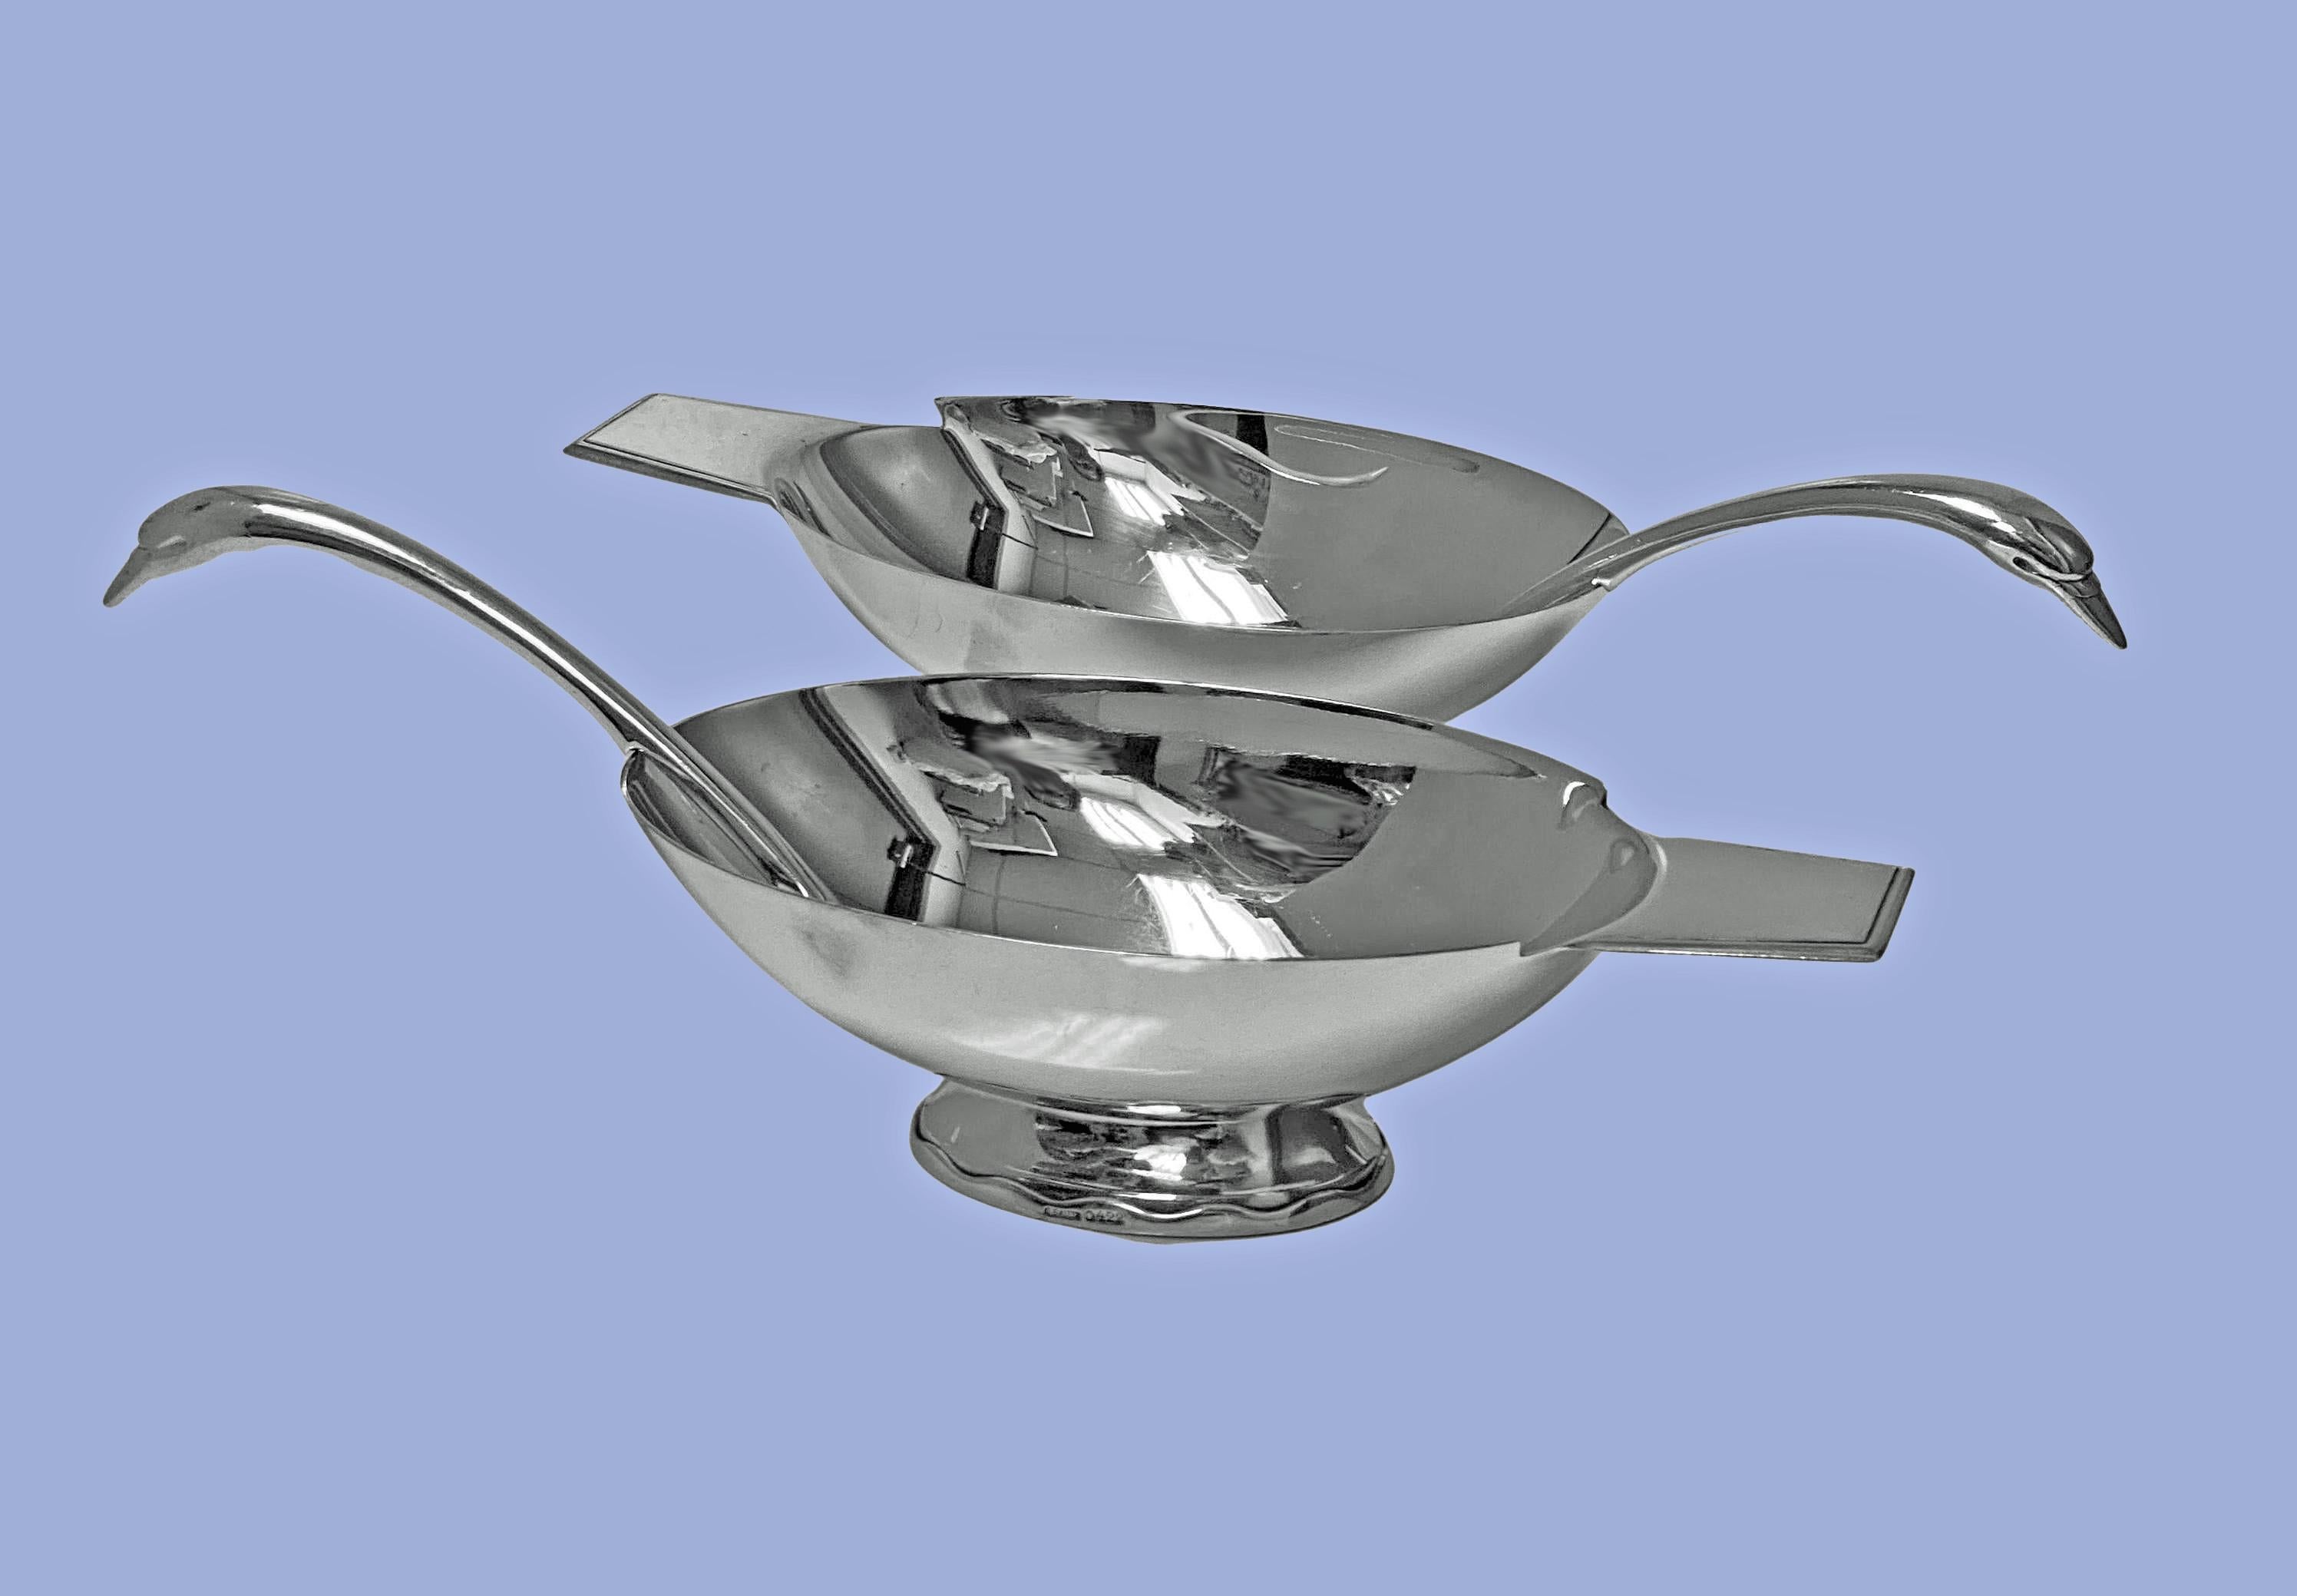 Pair of Christofle Art Deco silver plate sauceboats and ladles each conforming to the shape of a swan, designed by Christian Fjerdingstad for Christofle, France. C. 1935. The Sauceboats on oval shaped footed bases with wavy design motifs, plain oval